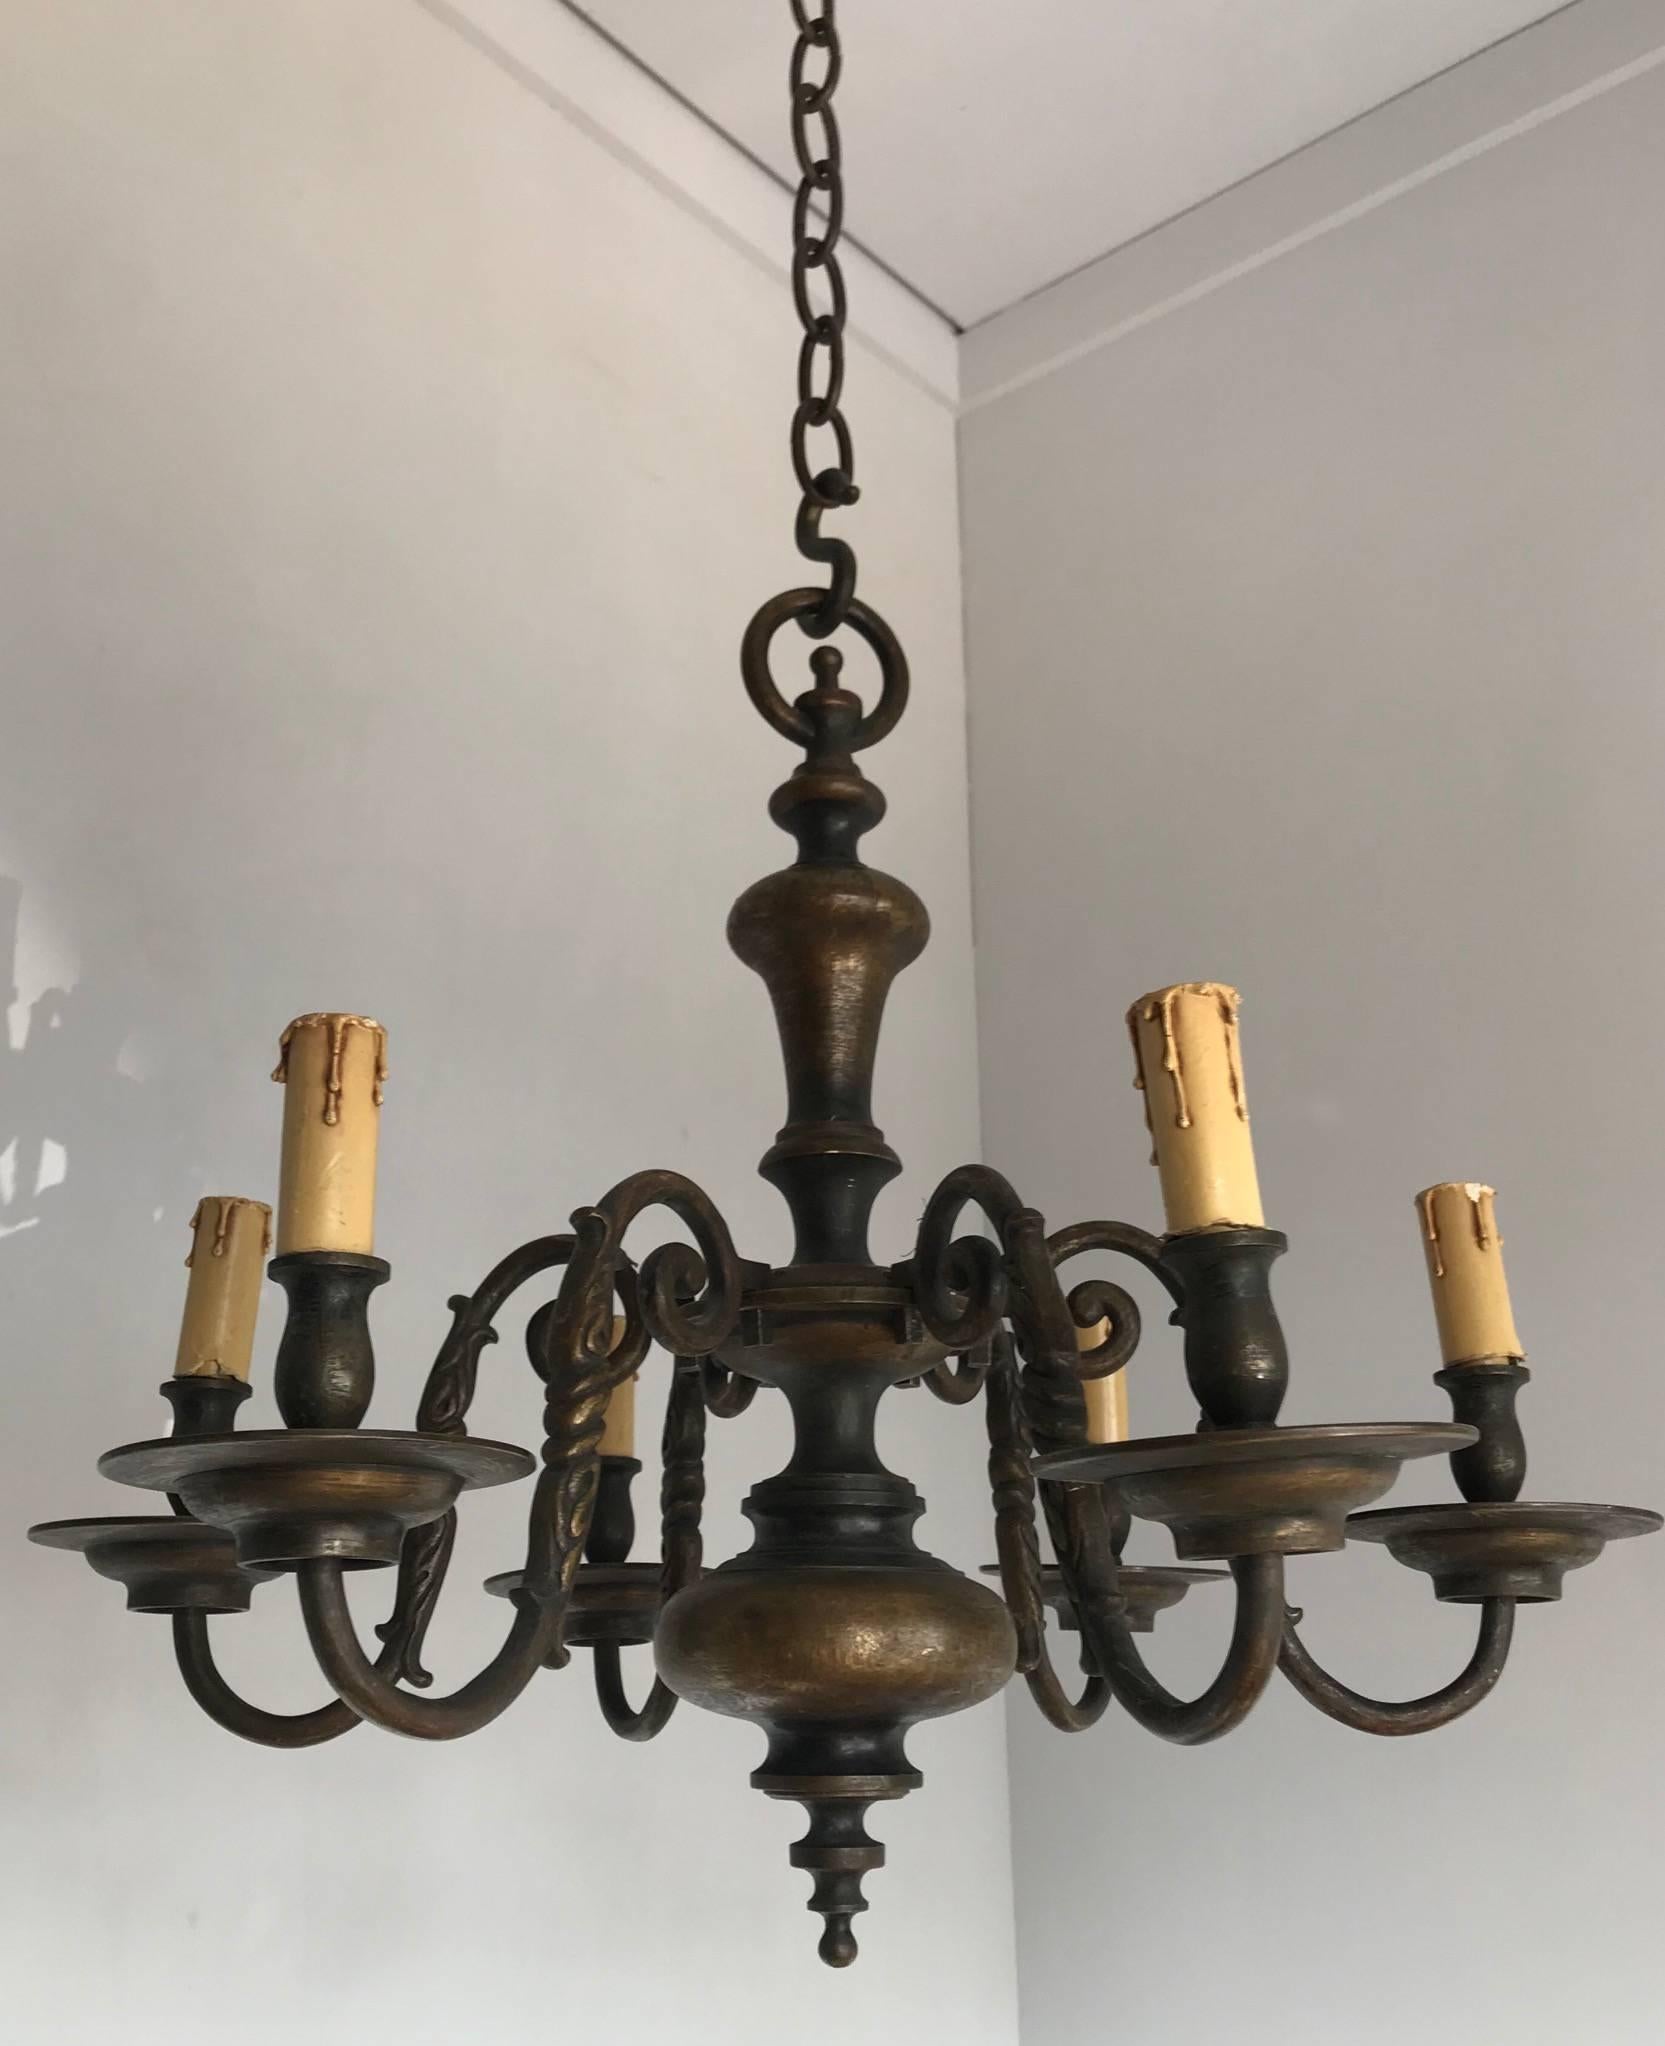 Antique Classic Design Heavy Bronze Six-Arm Candle or Electric Chandelier 8